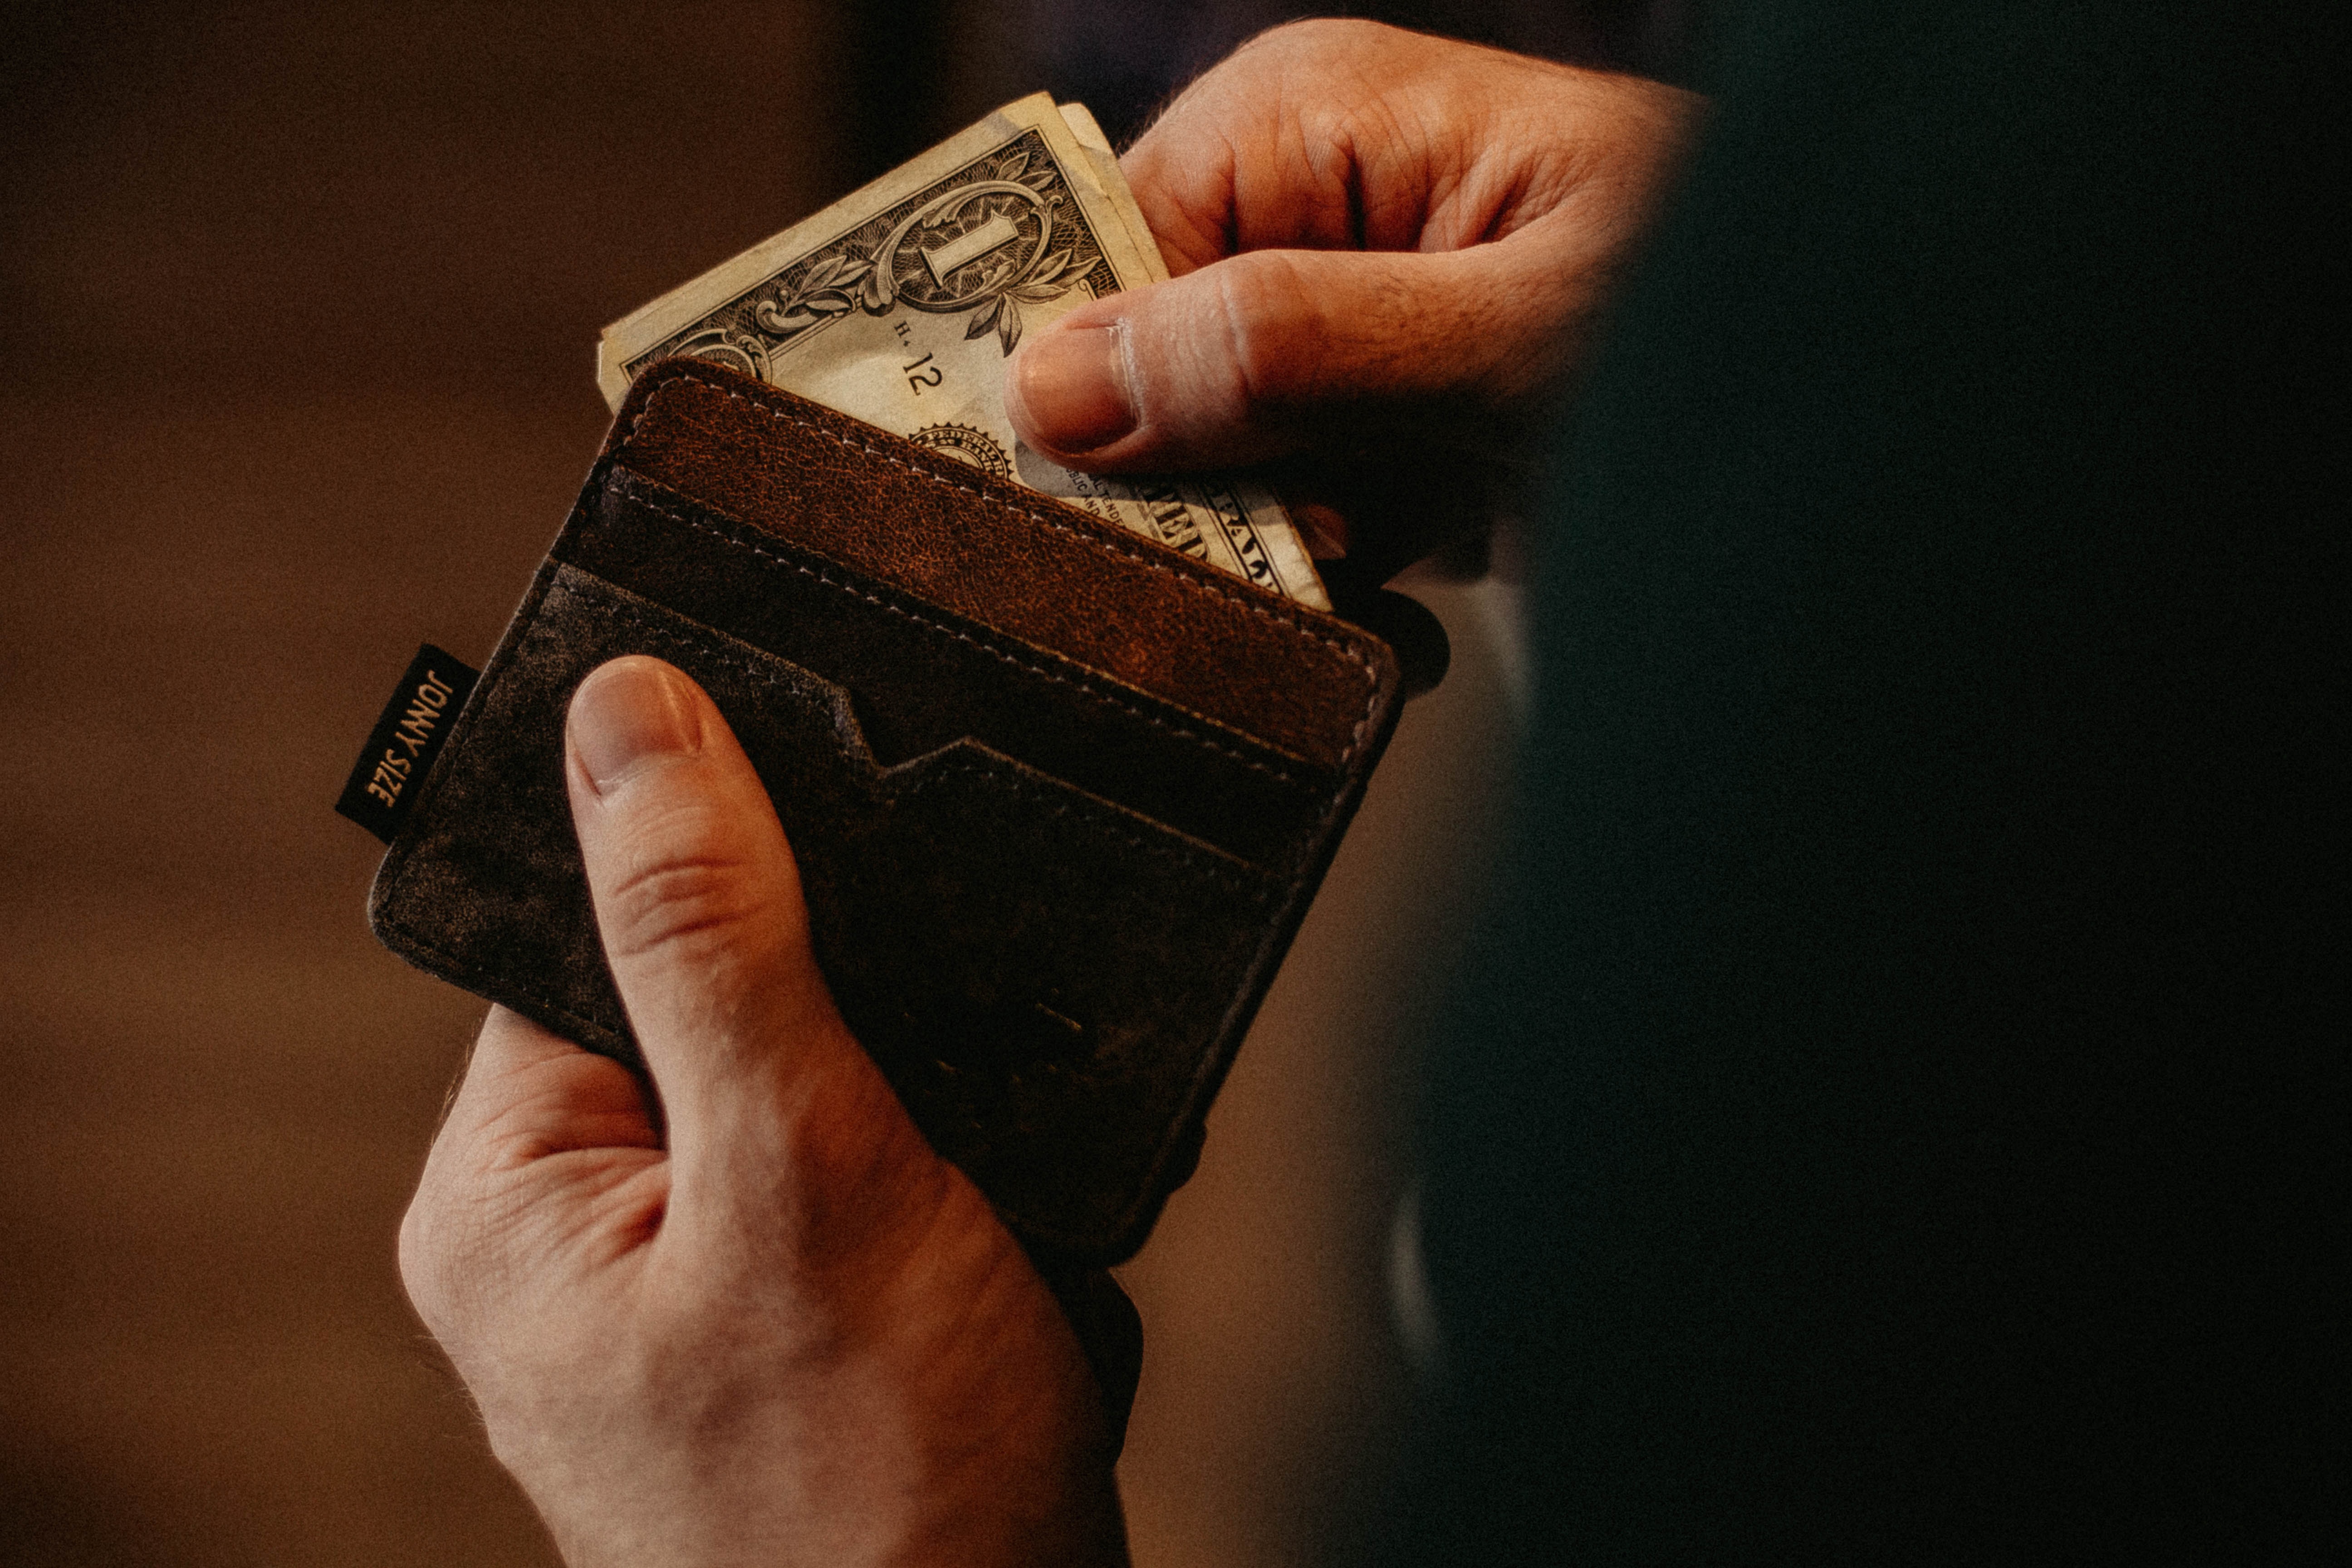 Hands holding a wallet with a dollar bill inside.